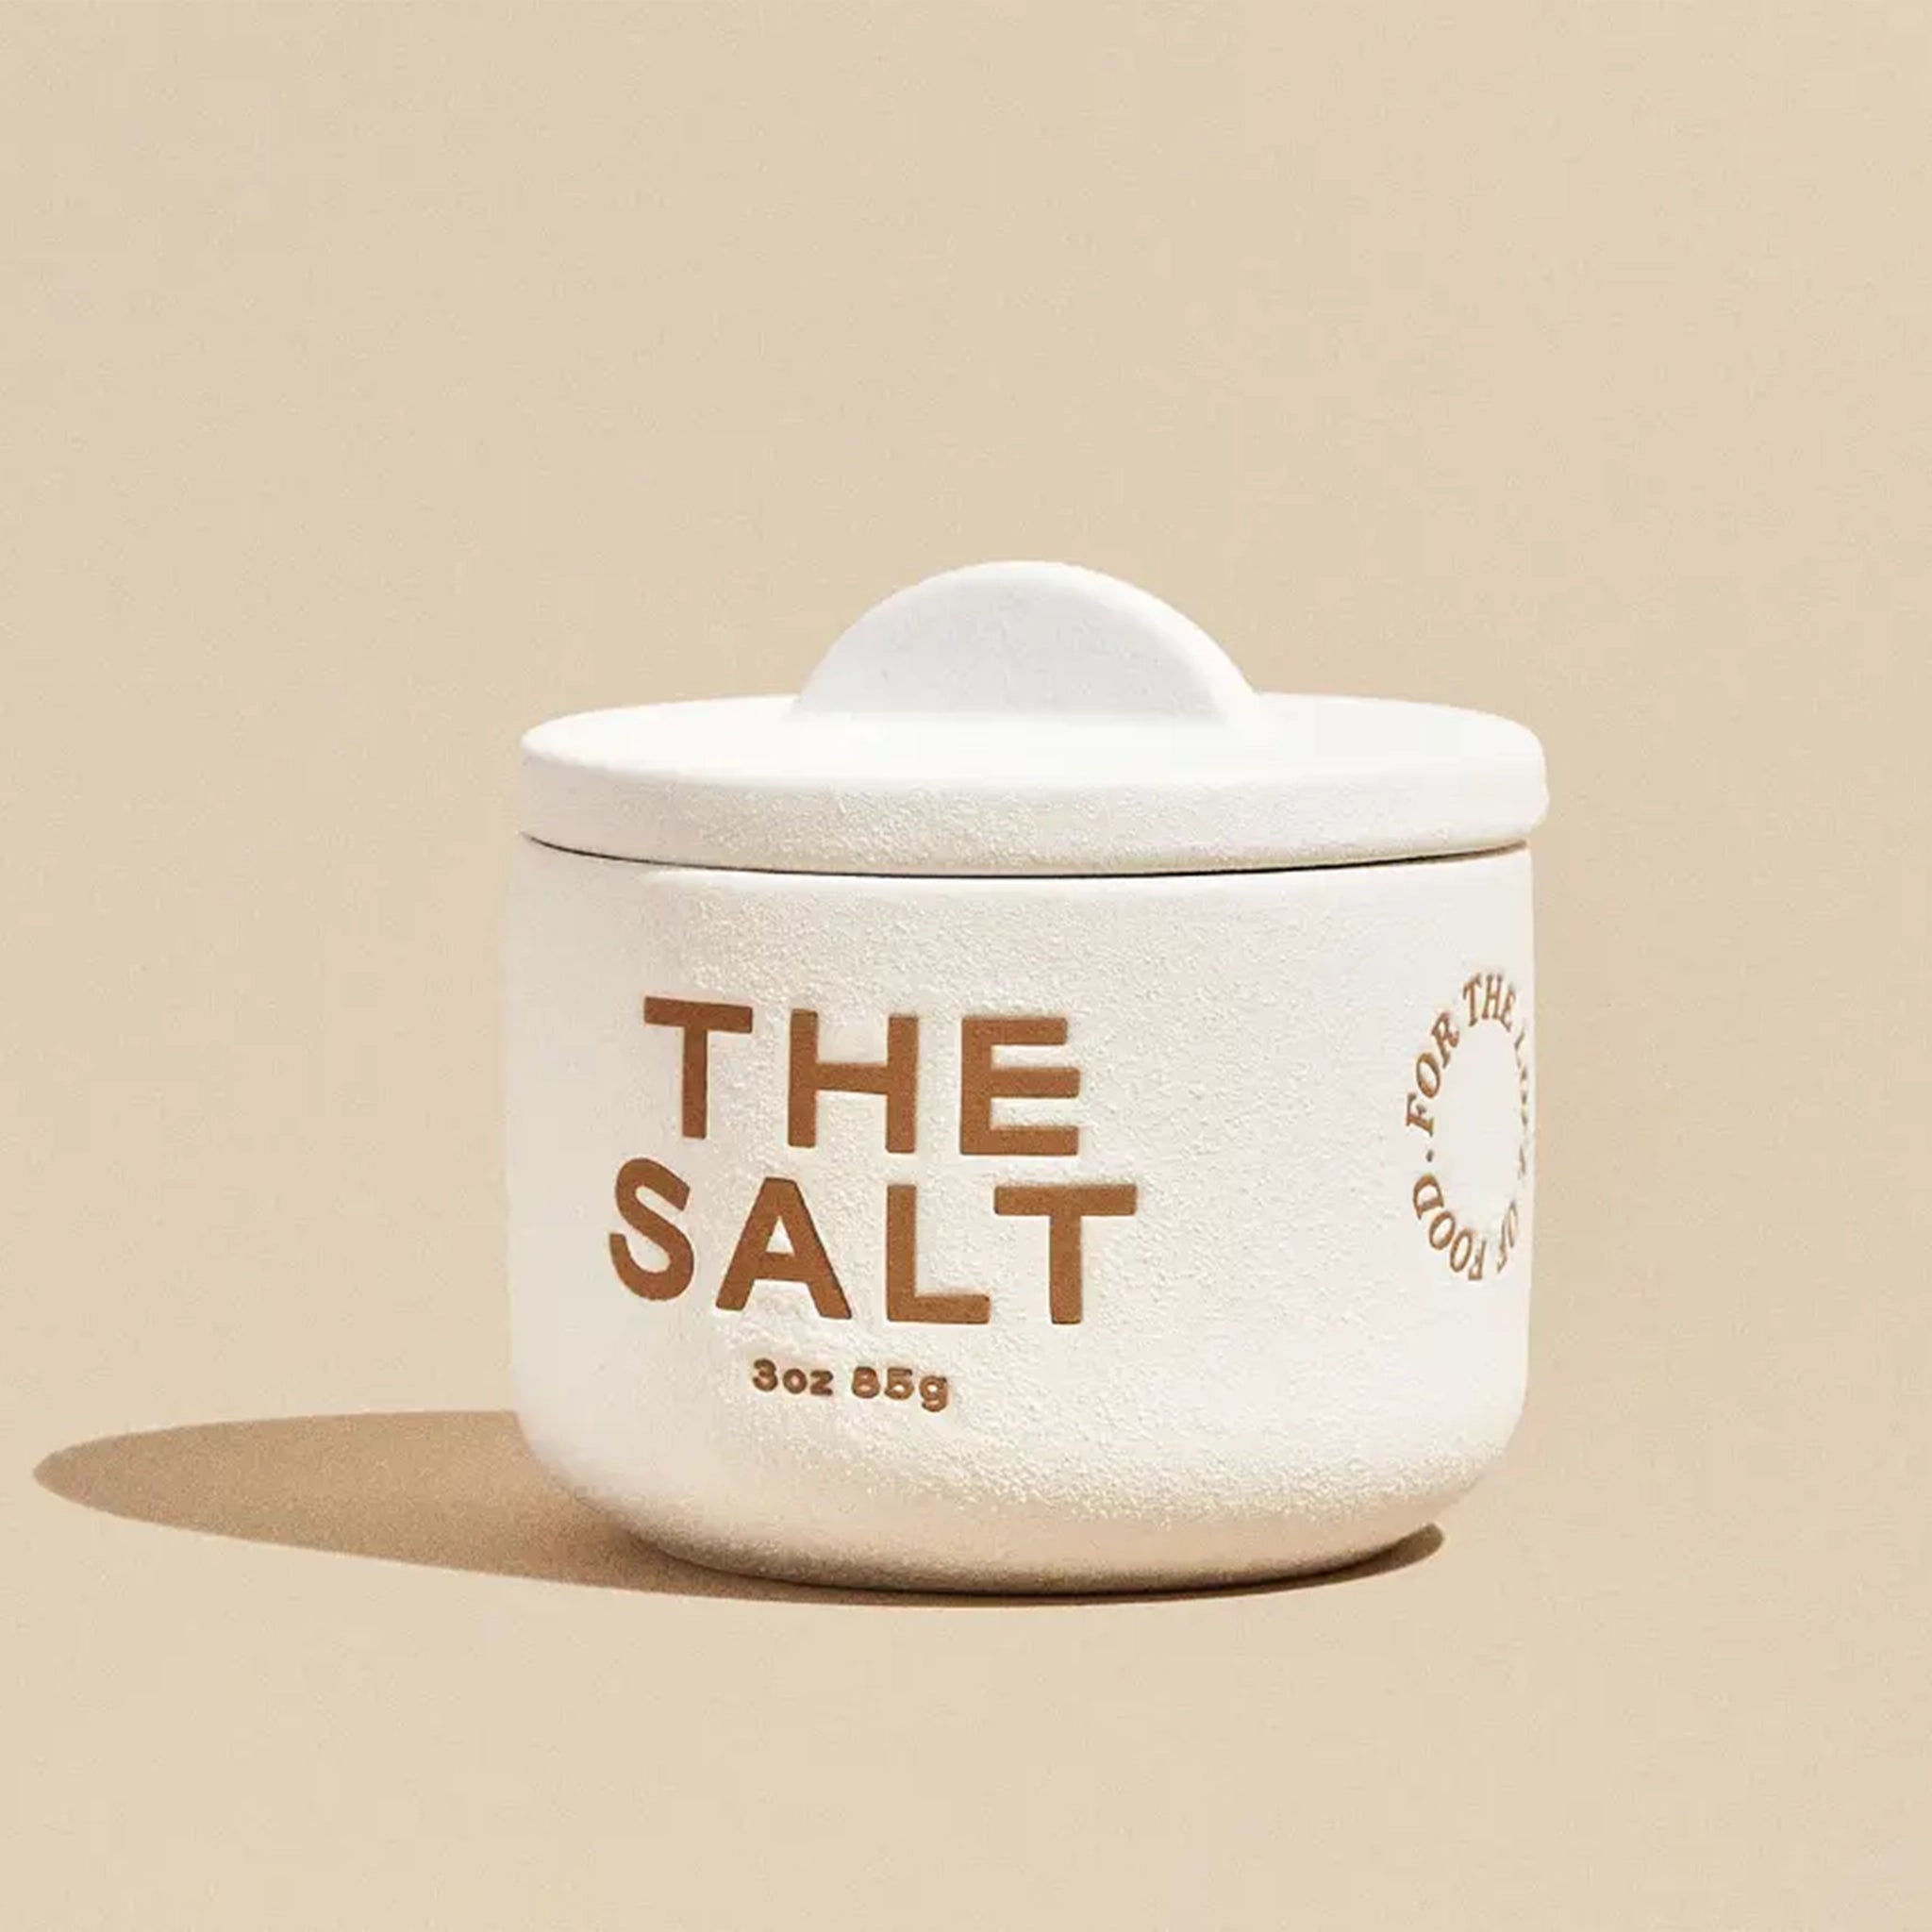 A 3oz bespoke pinch pot with a half moon lid that marries form and function along with brown text on the front that reads, "The Salt 3oz 85g".